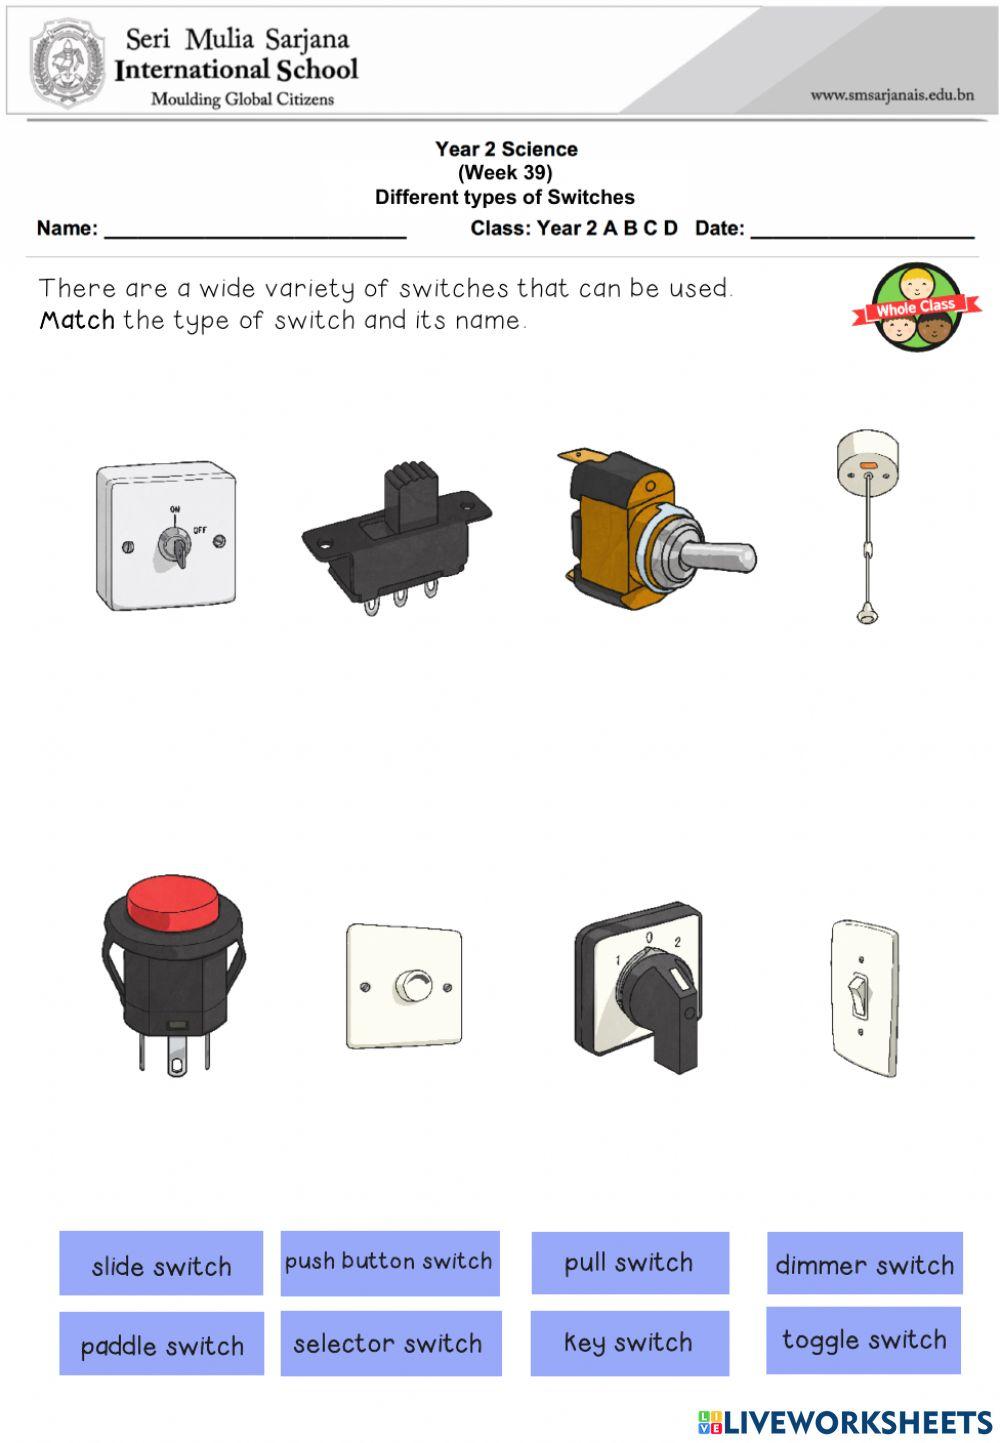 Unit 5C: Types of Switches